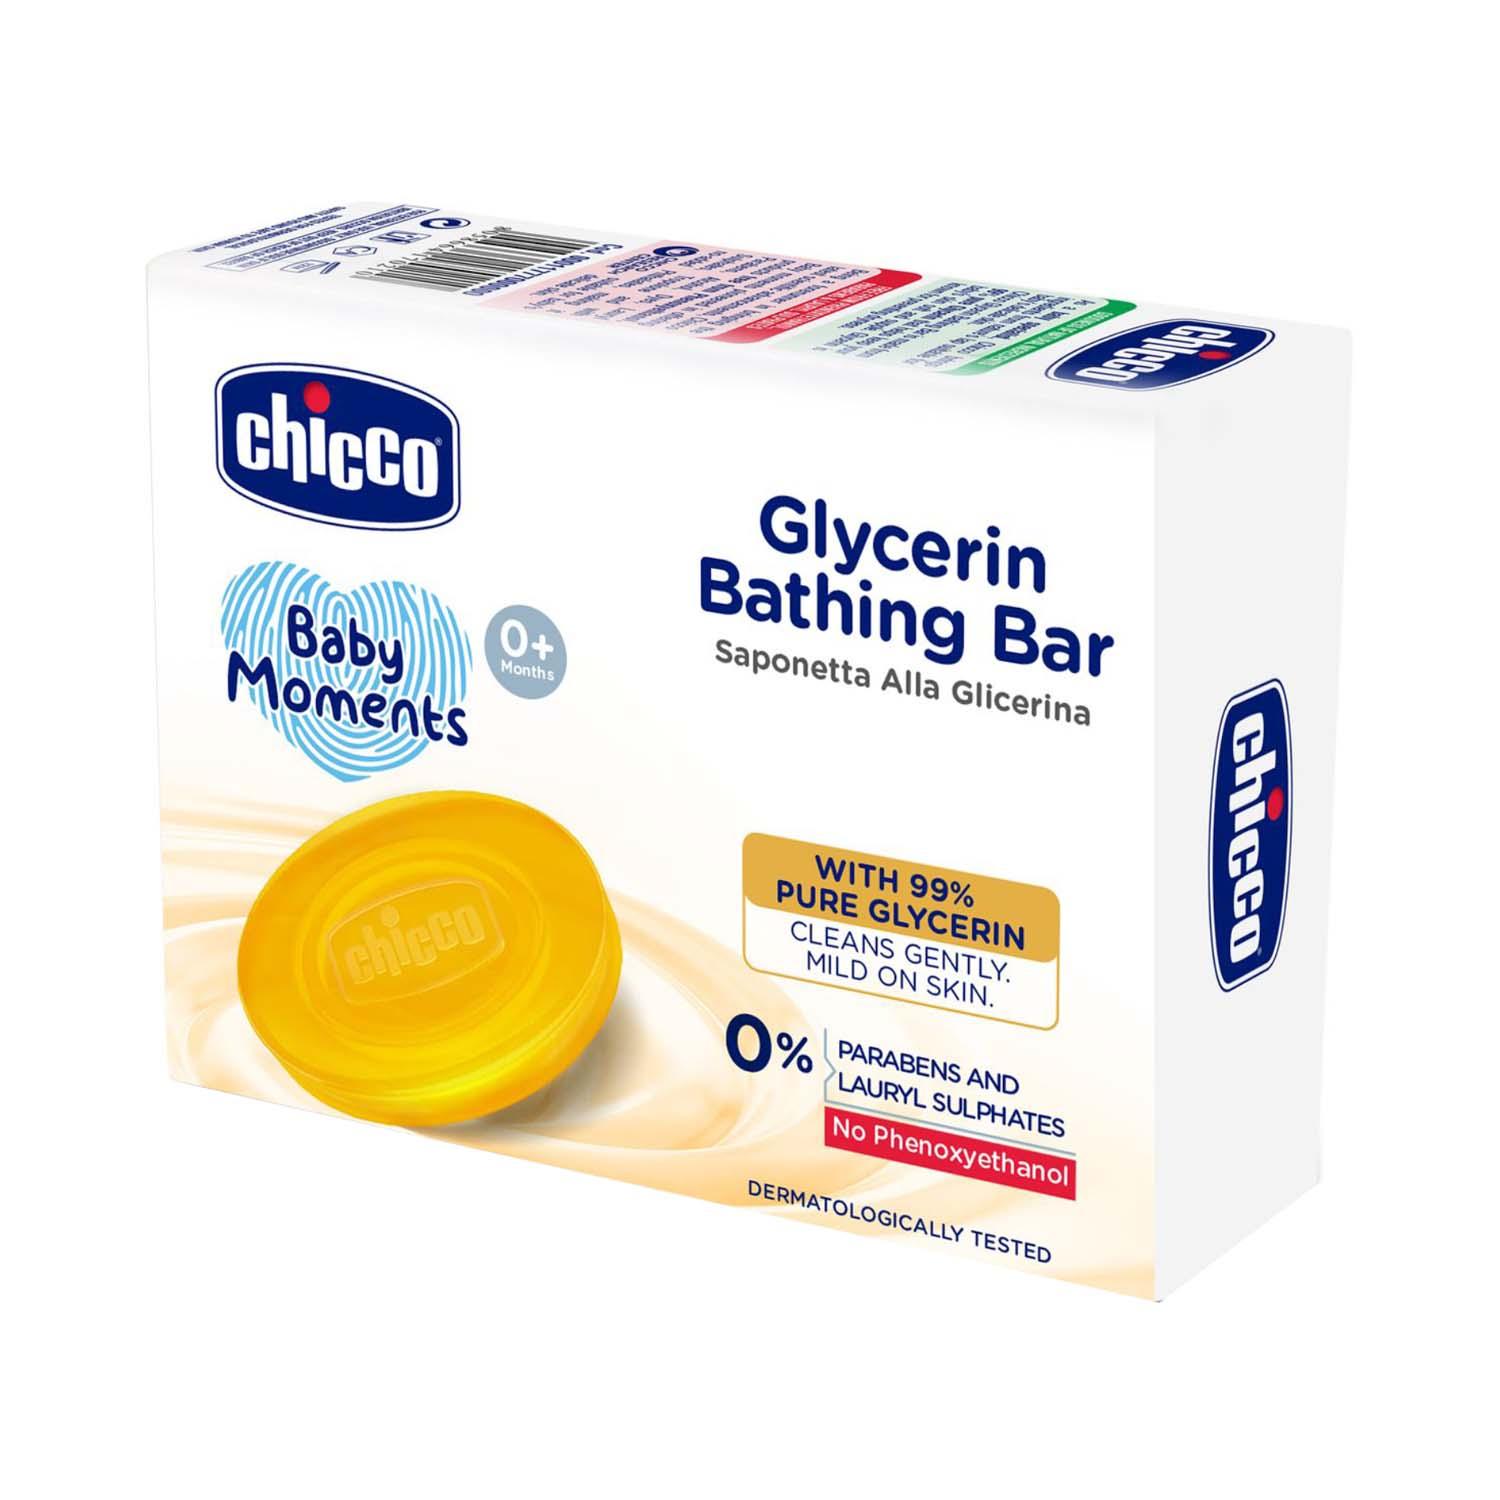 Chicco | Chicco Baby Moments Glycerin Bathing Bar (75 g)